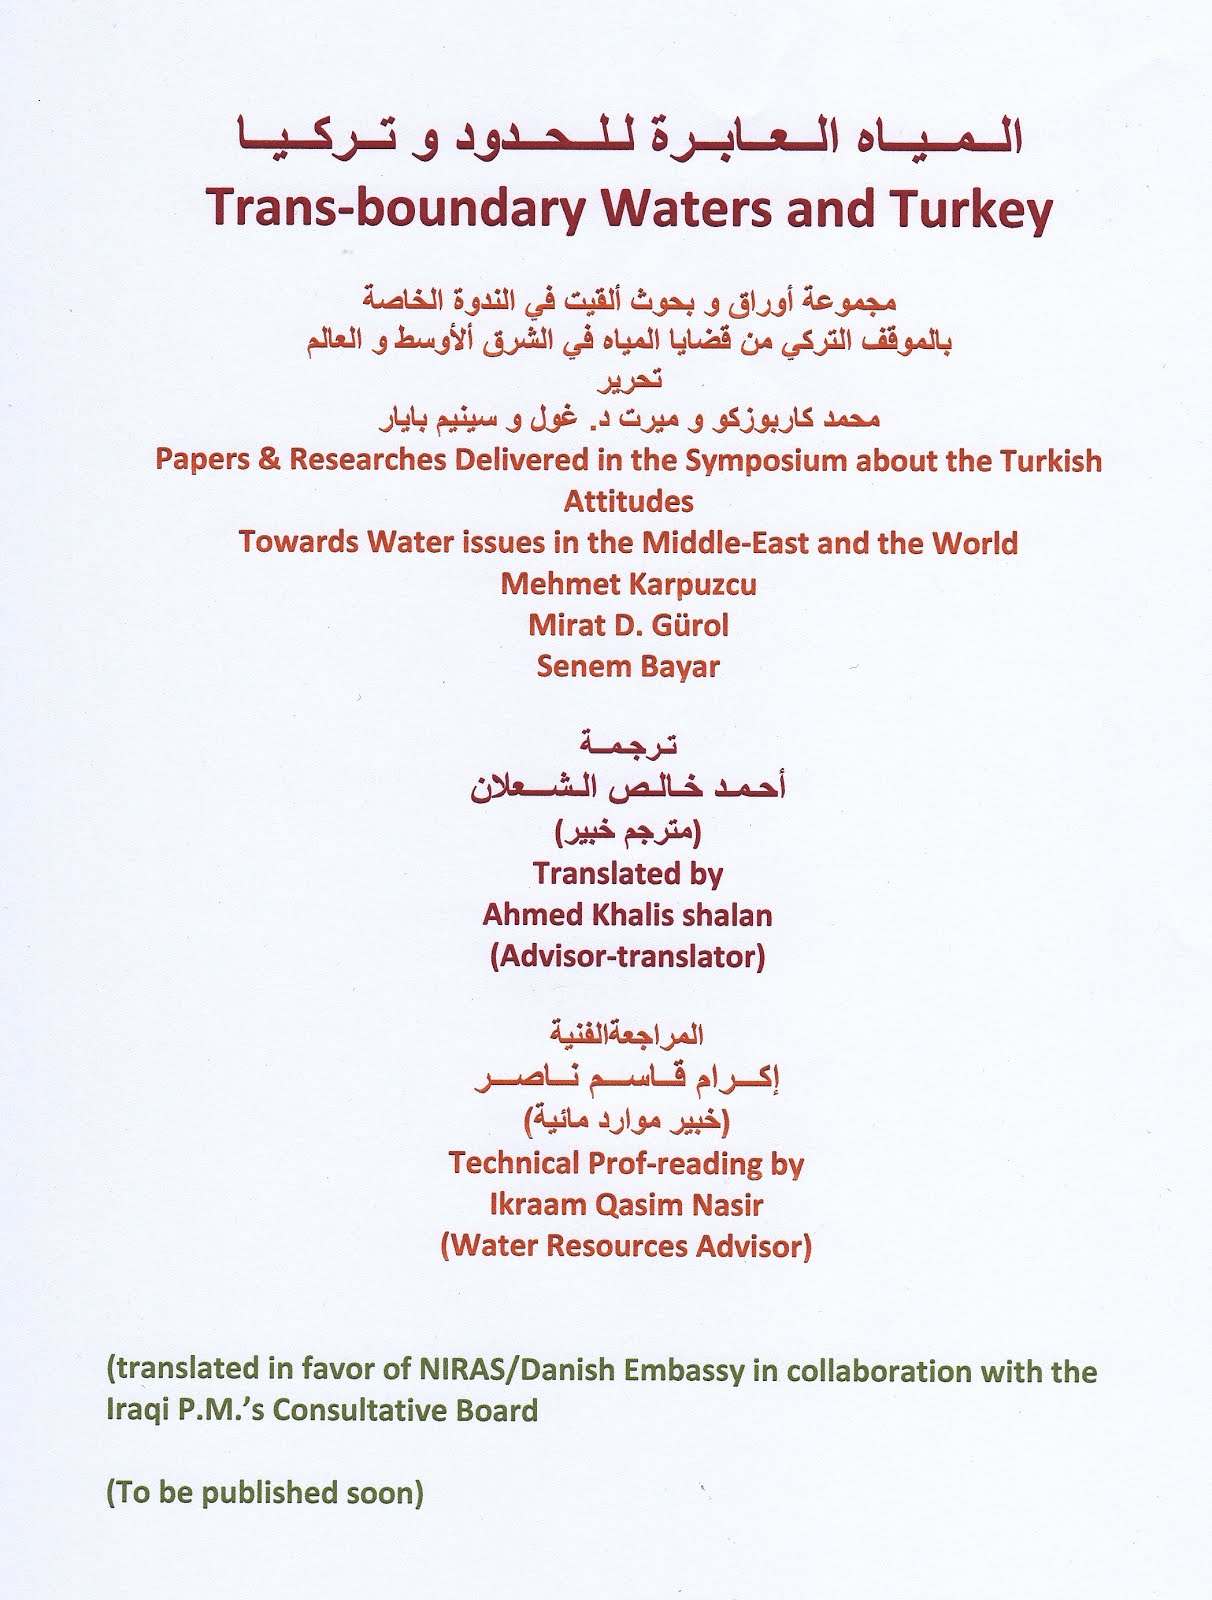 Transboundary Waters and Turkey